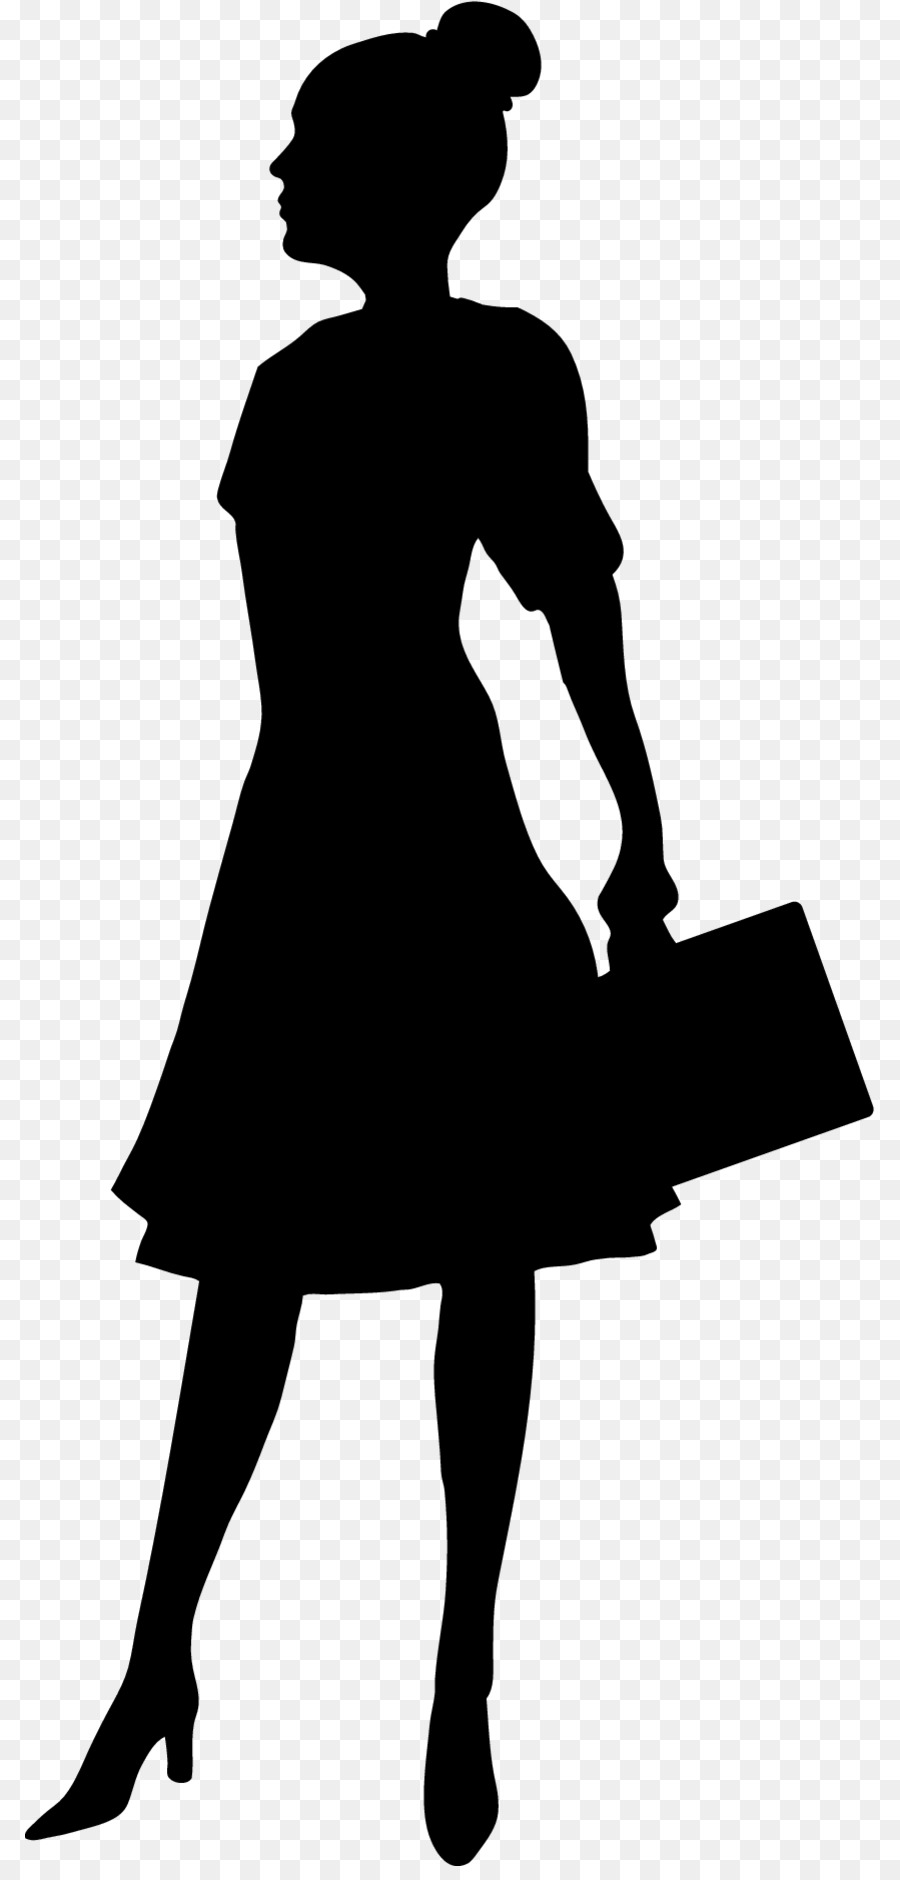 Silhouette Woman Professional Clip art - Cliparts Business Professional ...